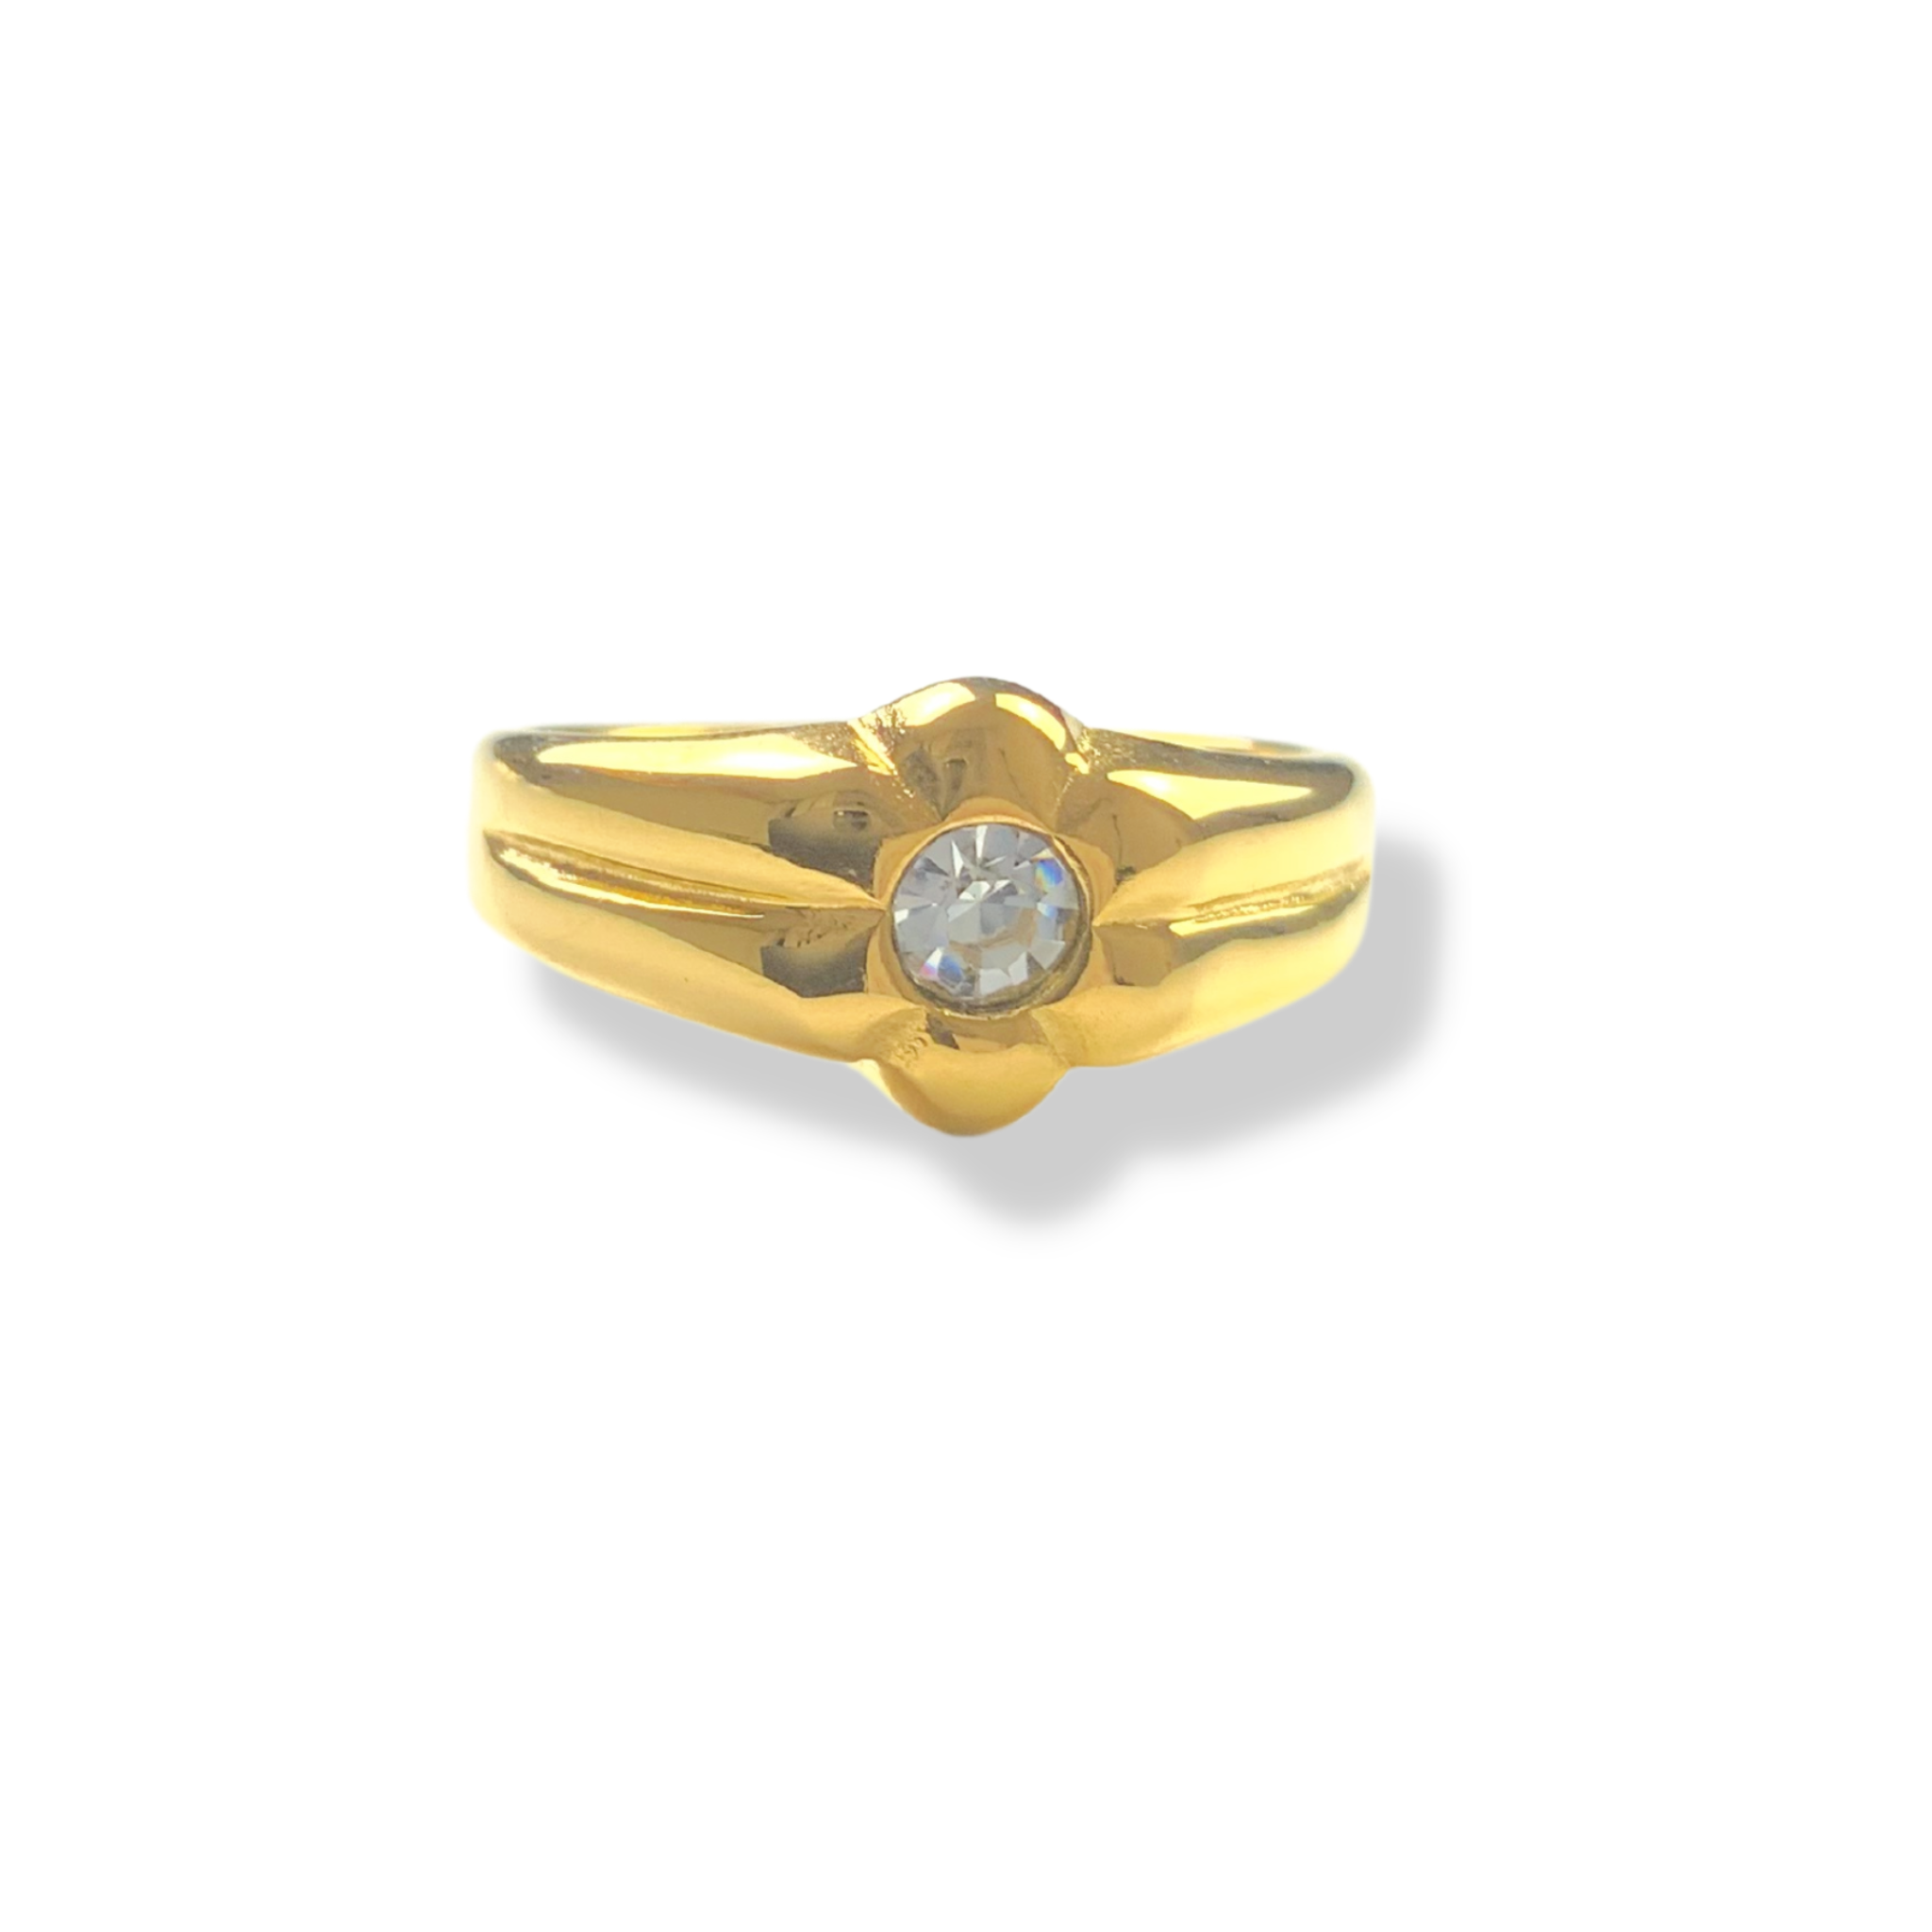 Forget Me Not Ring